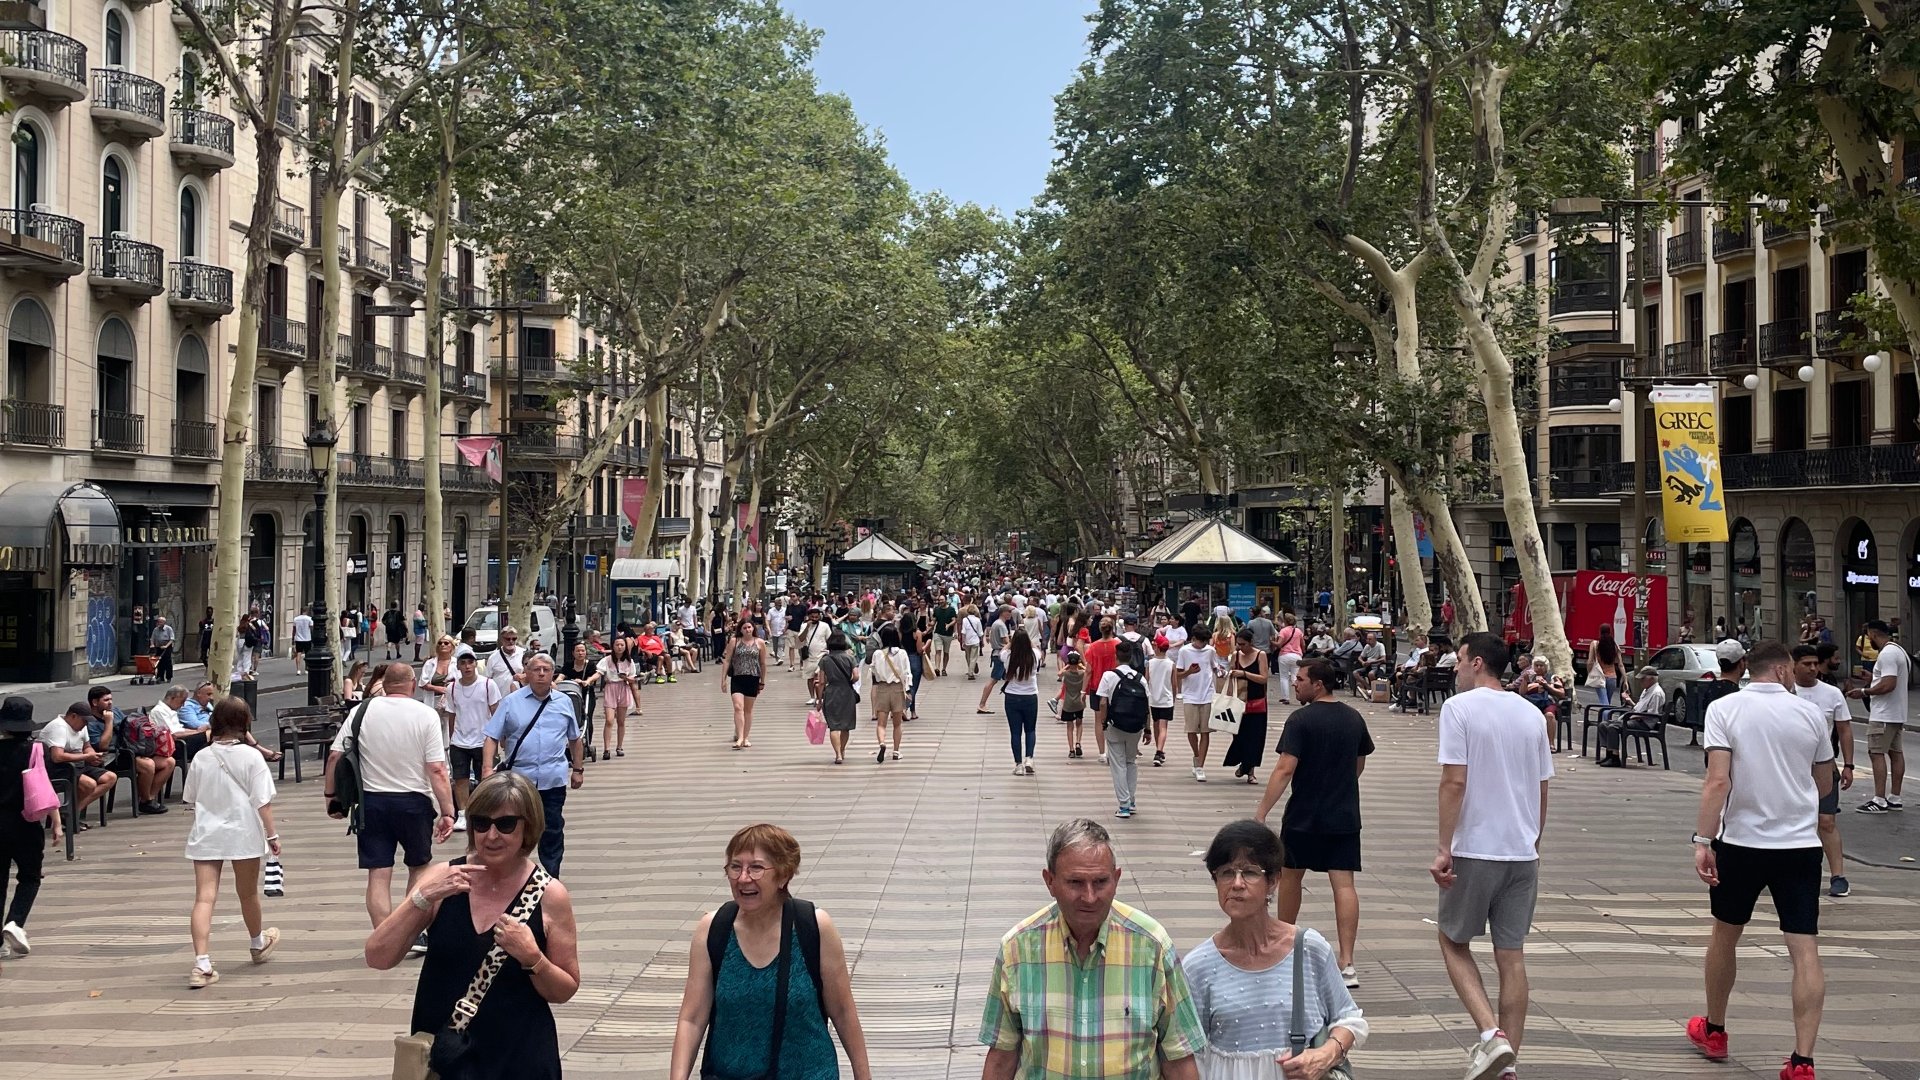 La Rambla: Guide to One of Barcelona’s Most Famous Streets